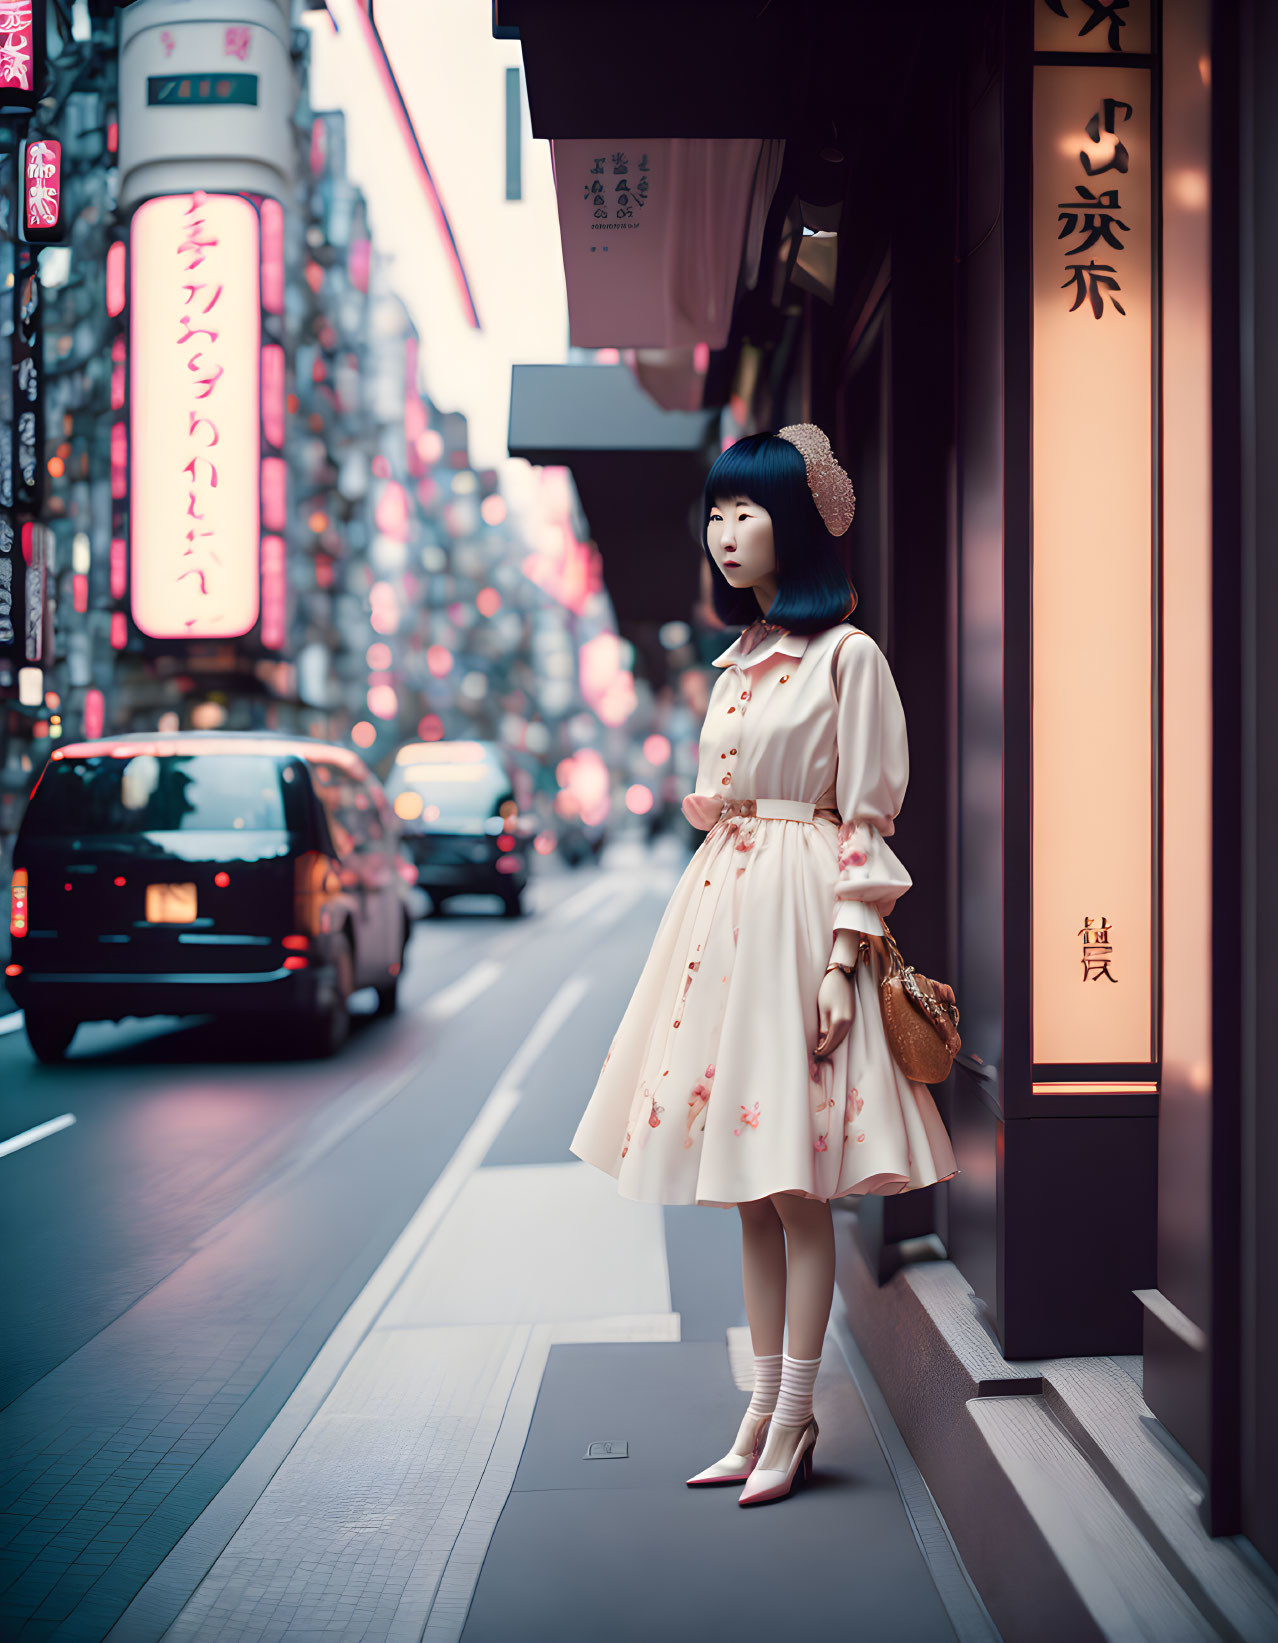 Woman in Floral Dress on City Street at Dusk with Japanese Signage and Neon Lights